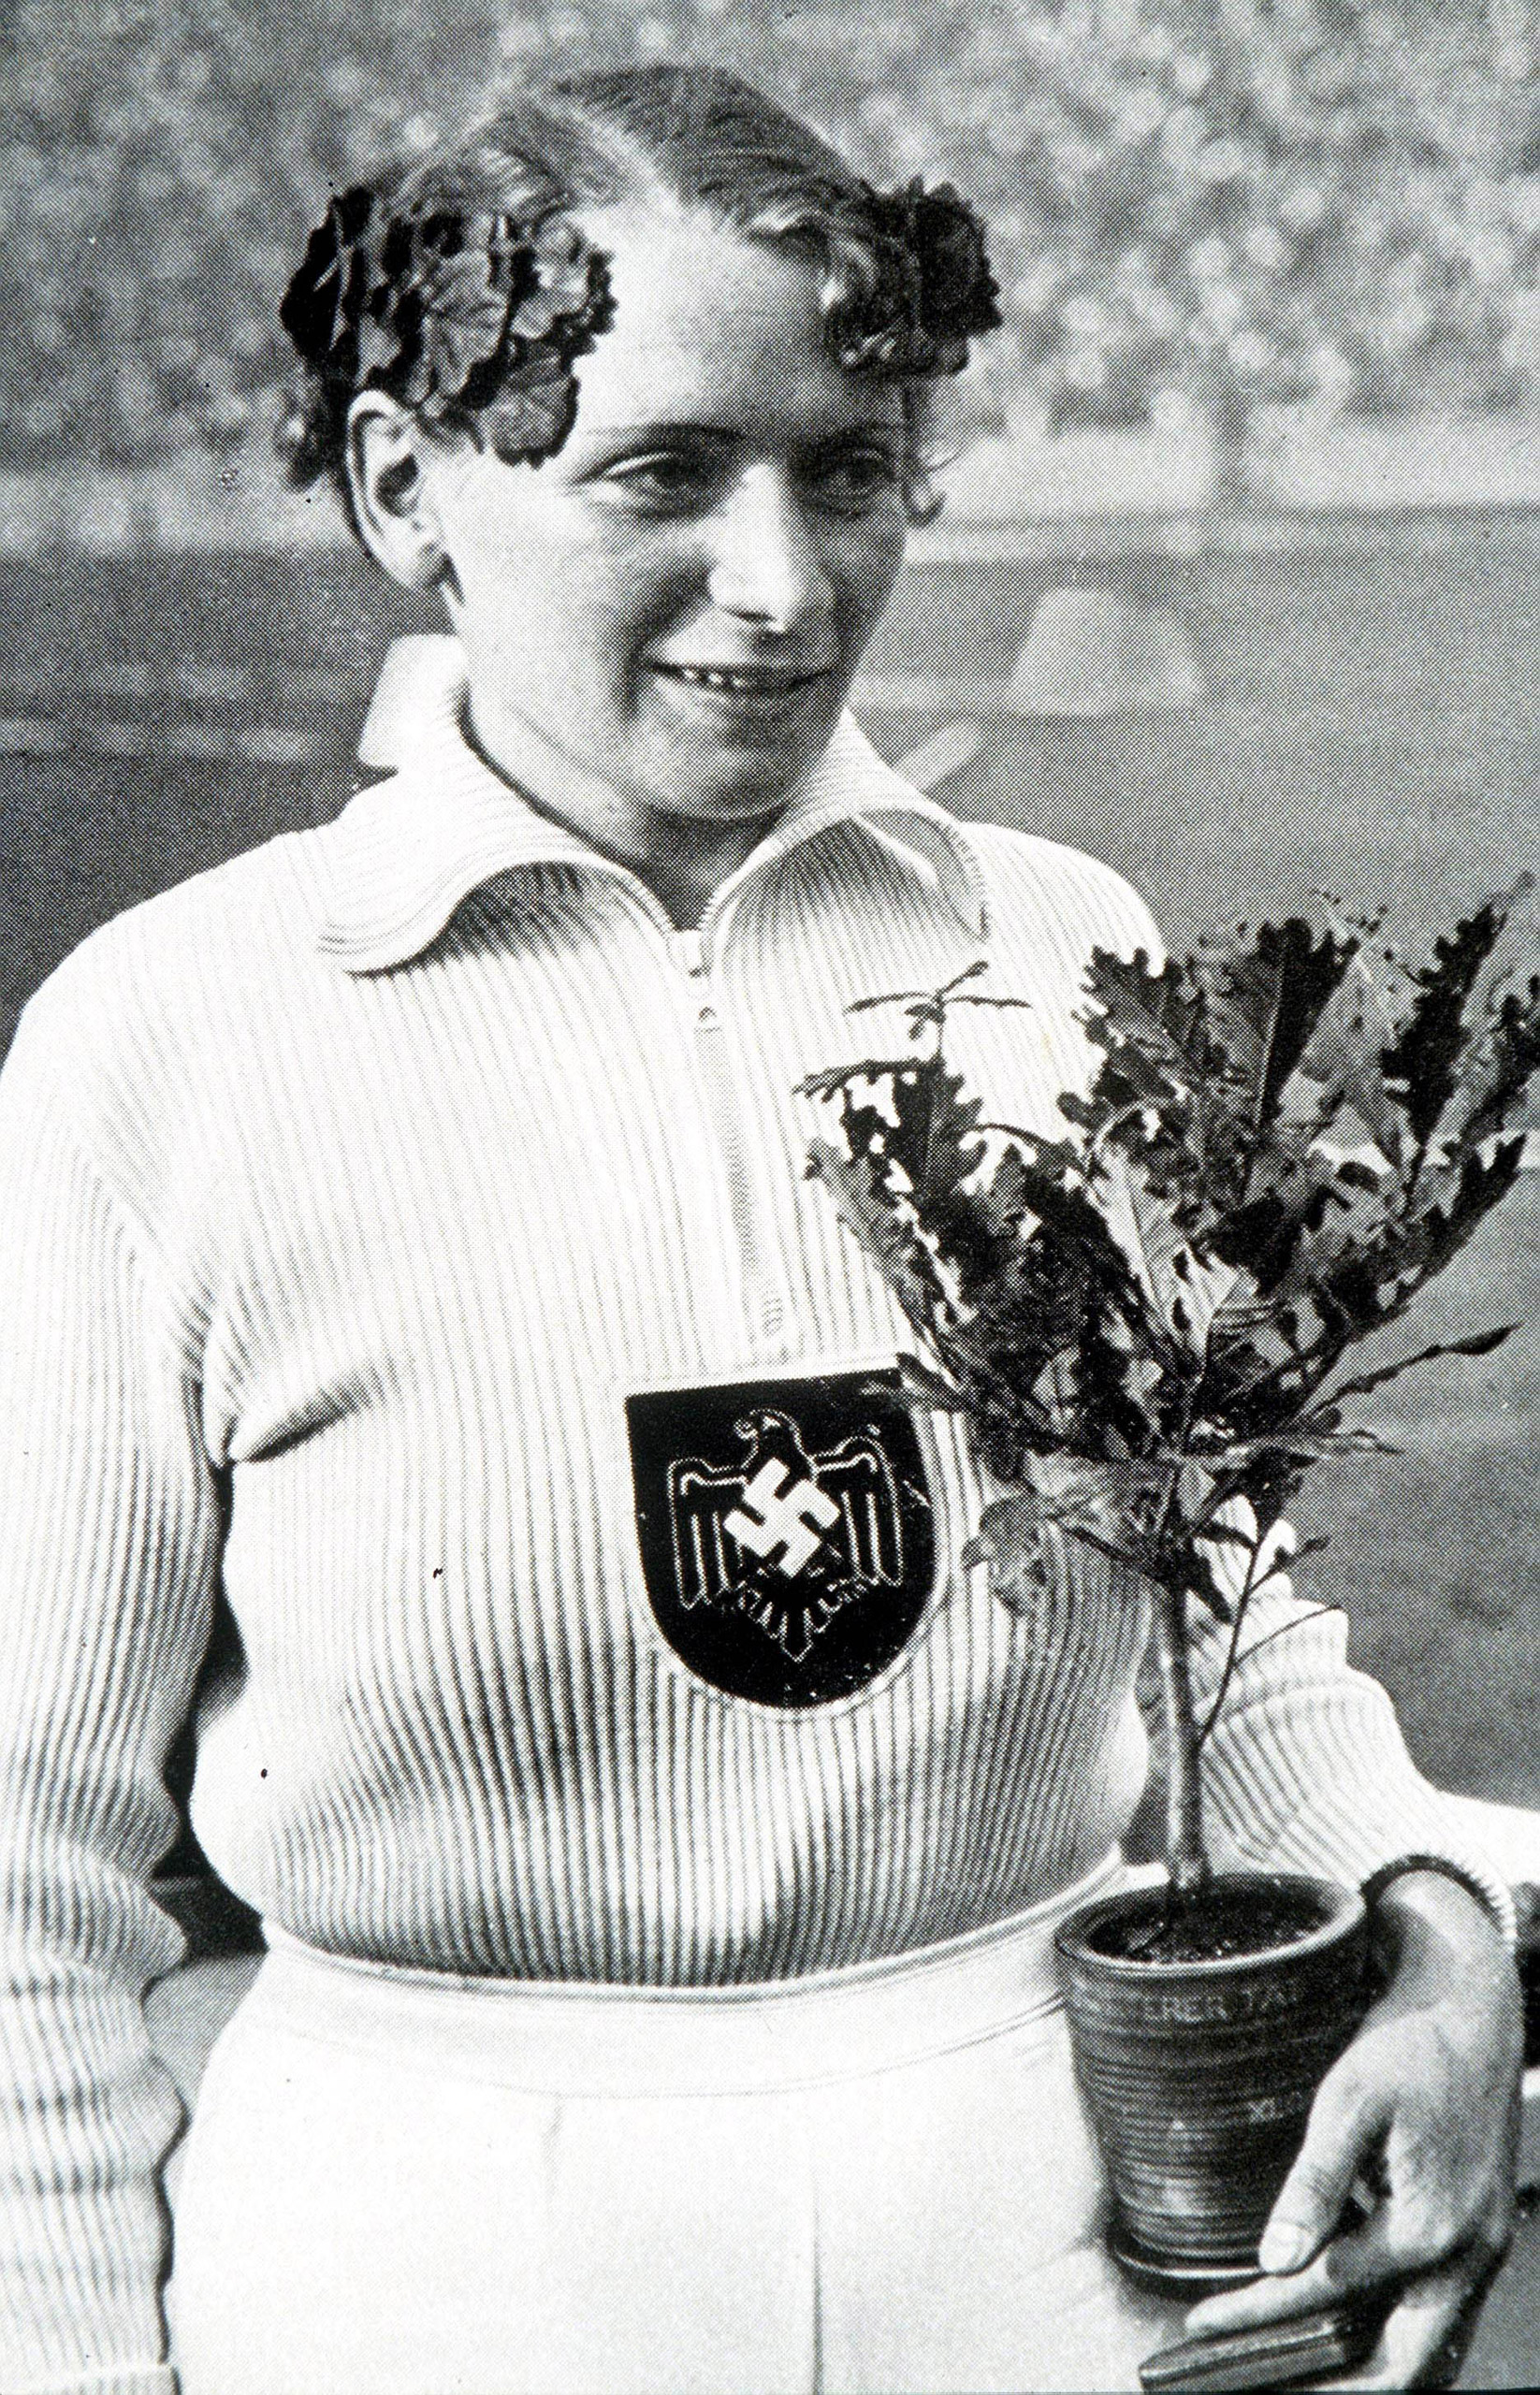 1936 Olympic Games. Berlin, Germany. Women's Javelin. Germany's Tilly Fleischer who won the gold medal.